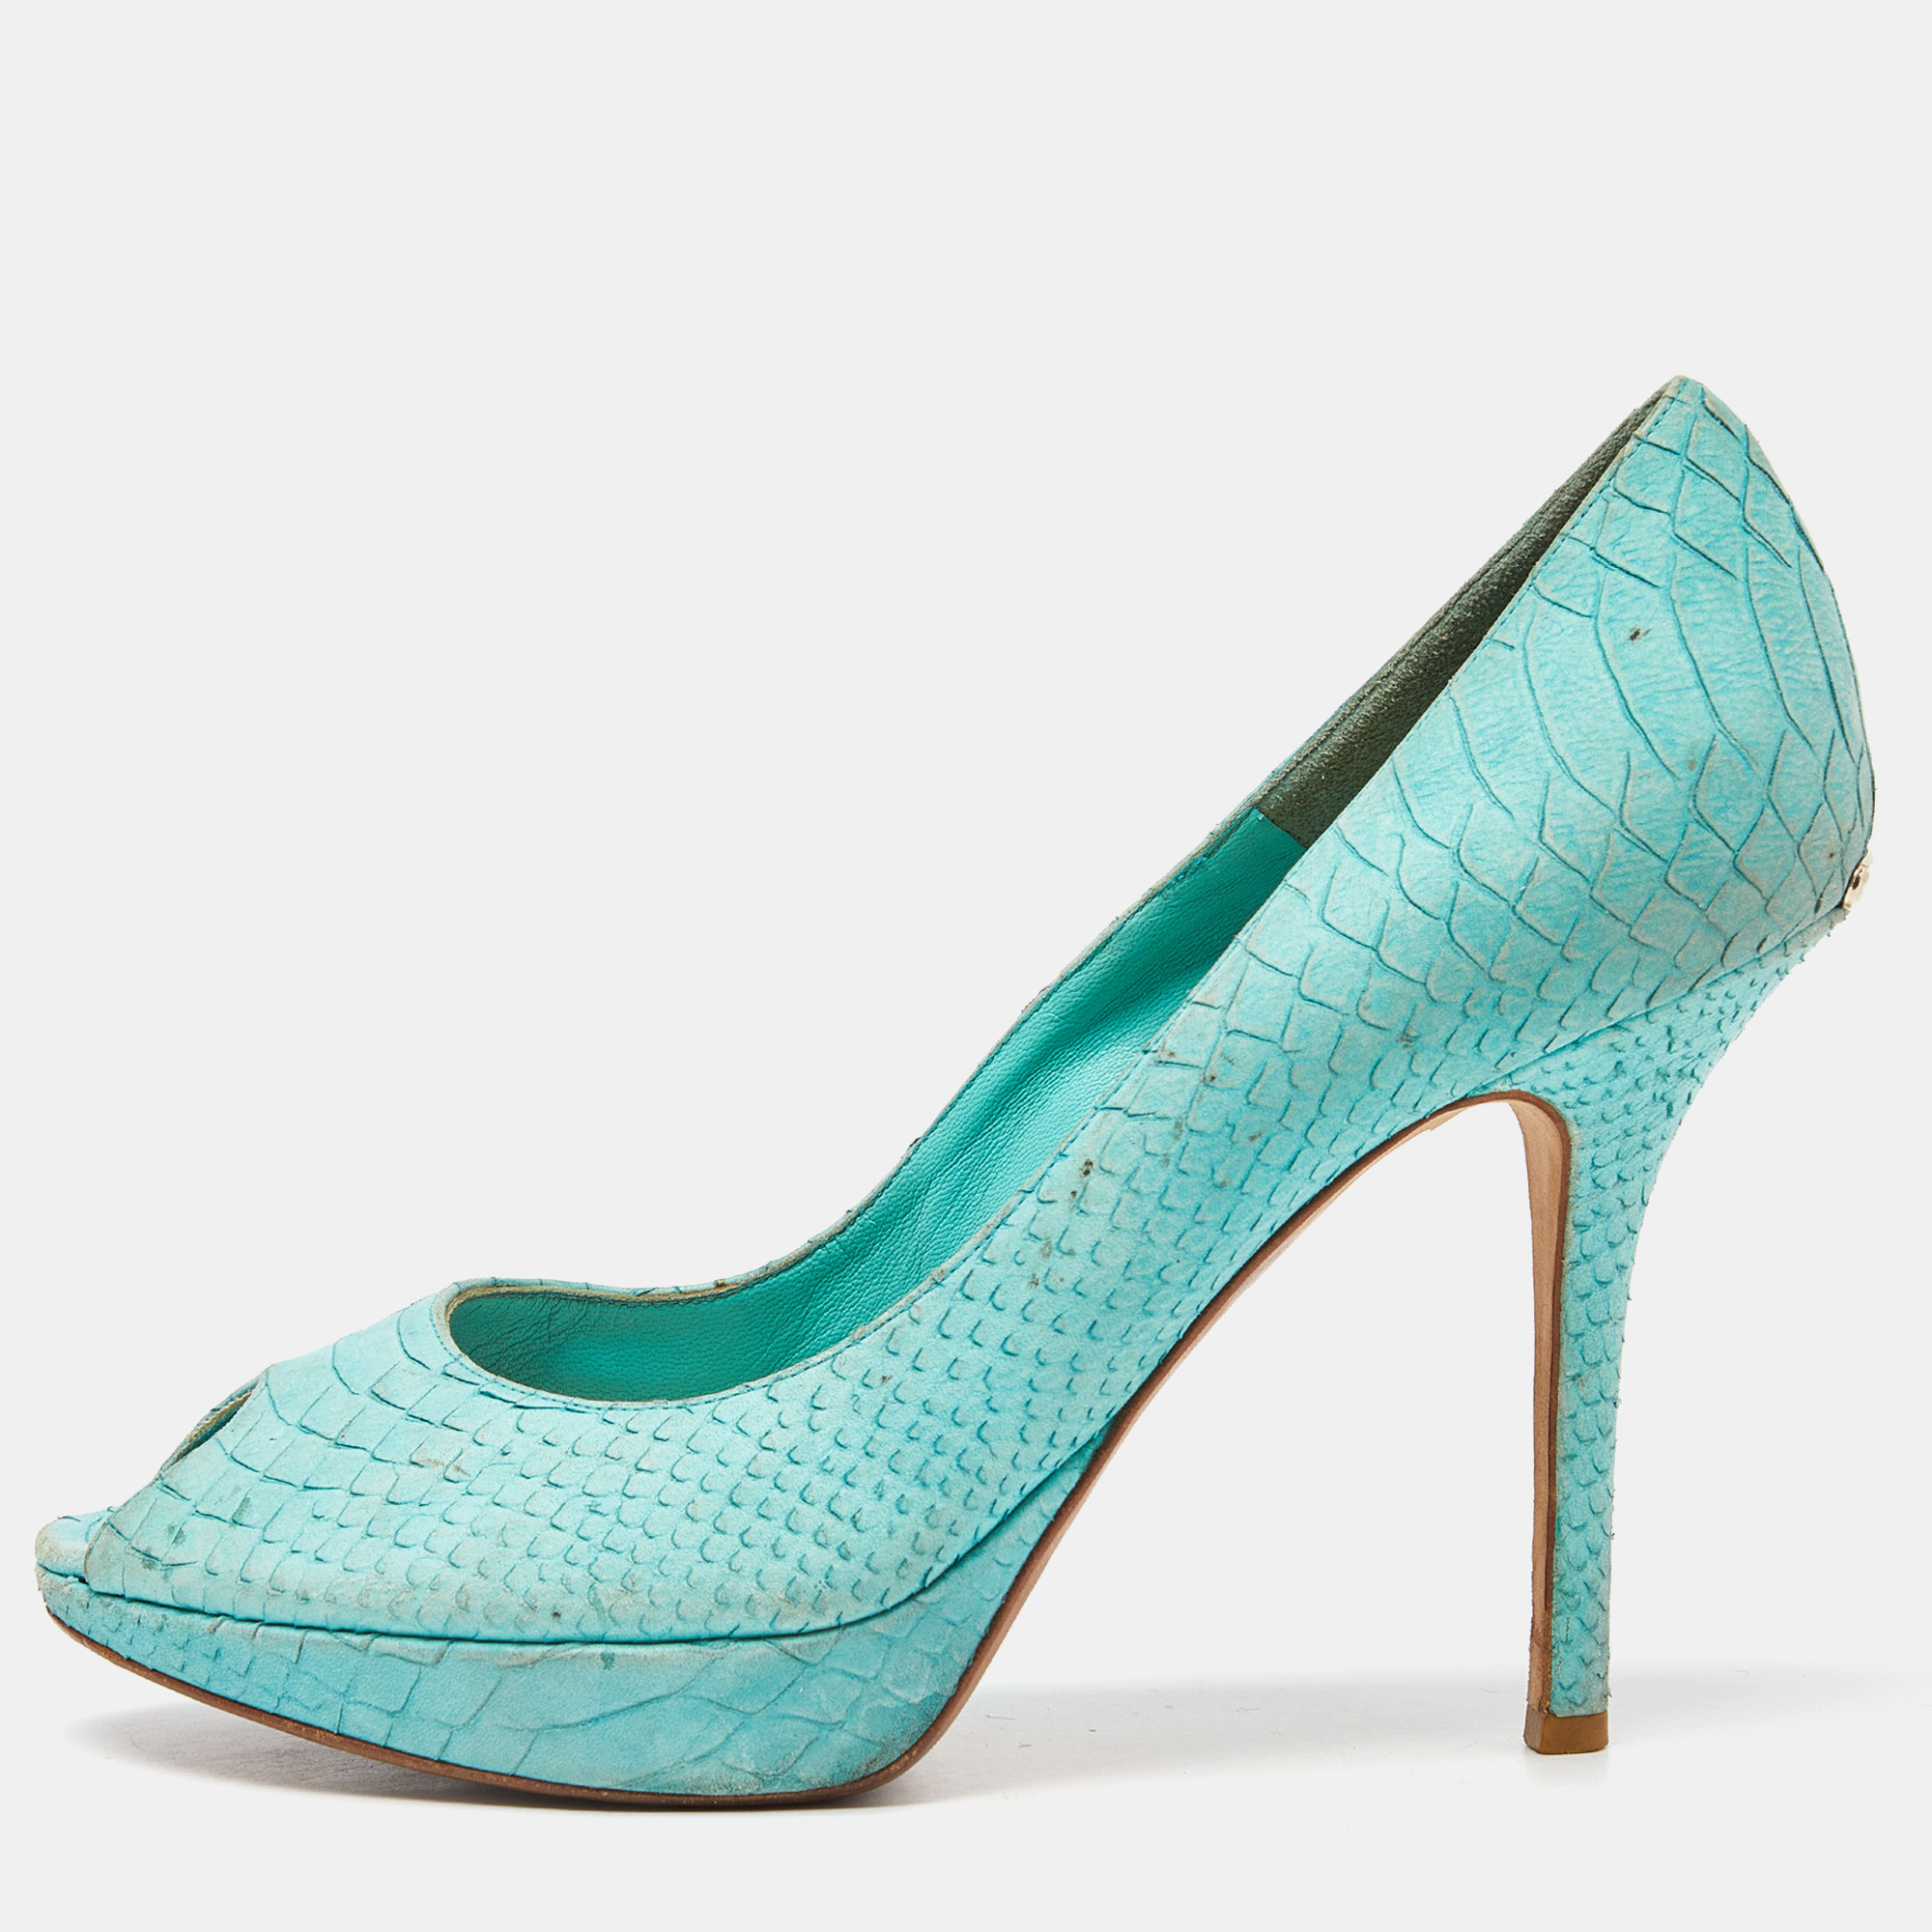 Dior turquoise blue python embossed miss dior peep toe pumps size 39